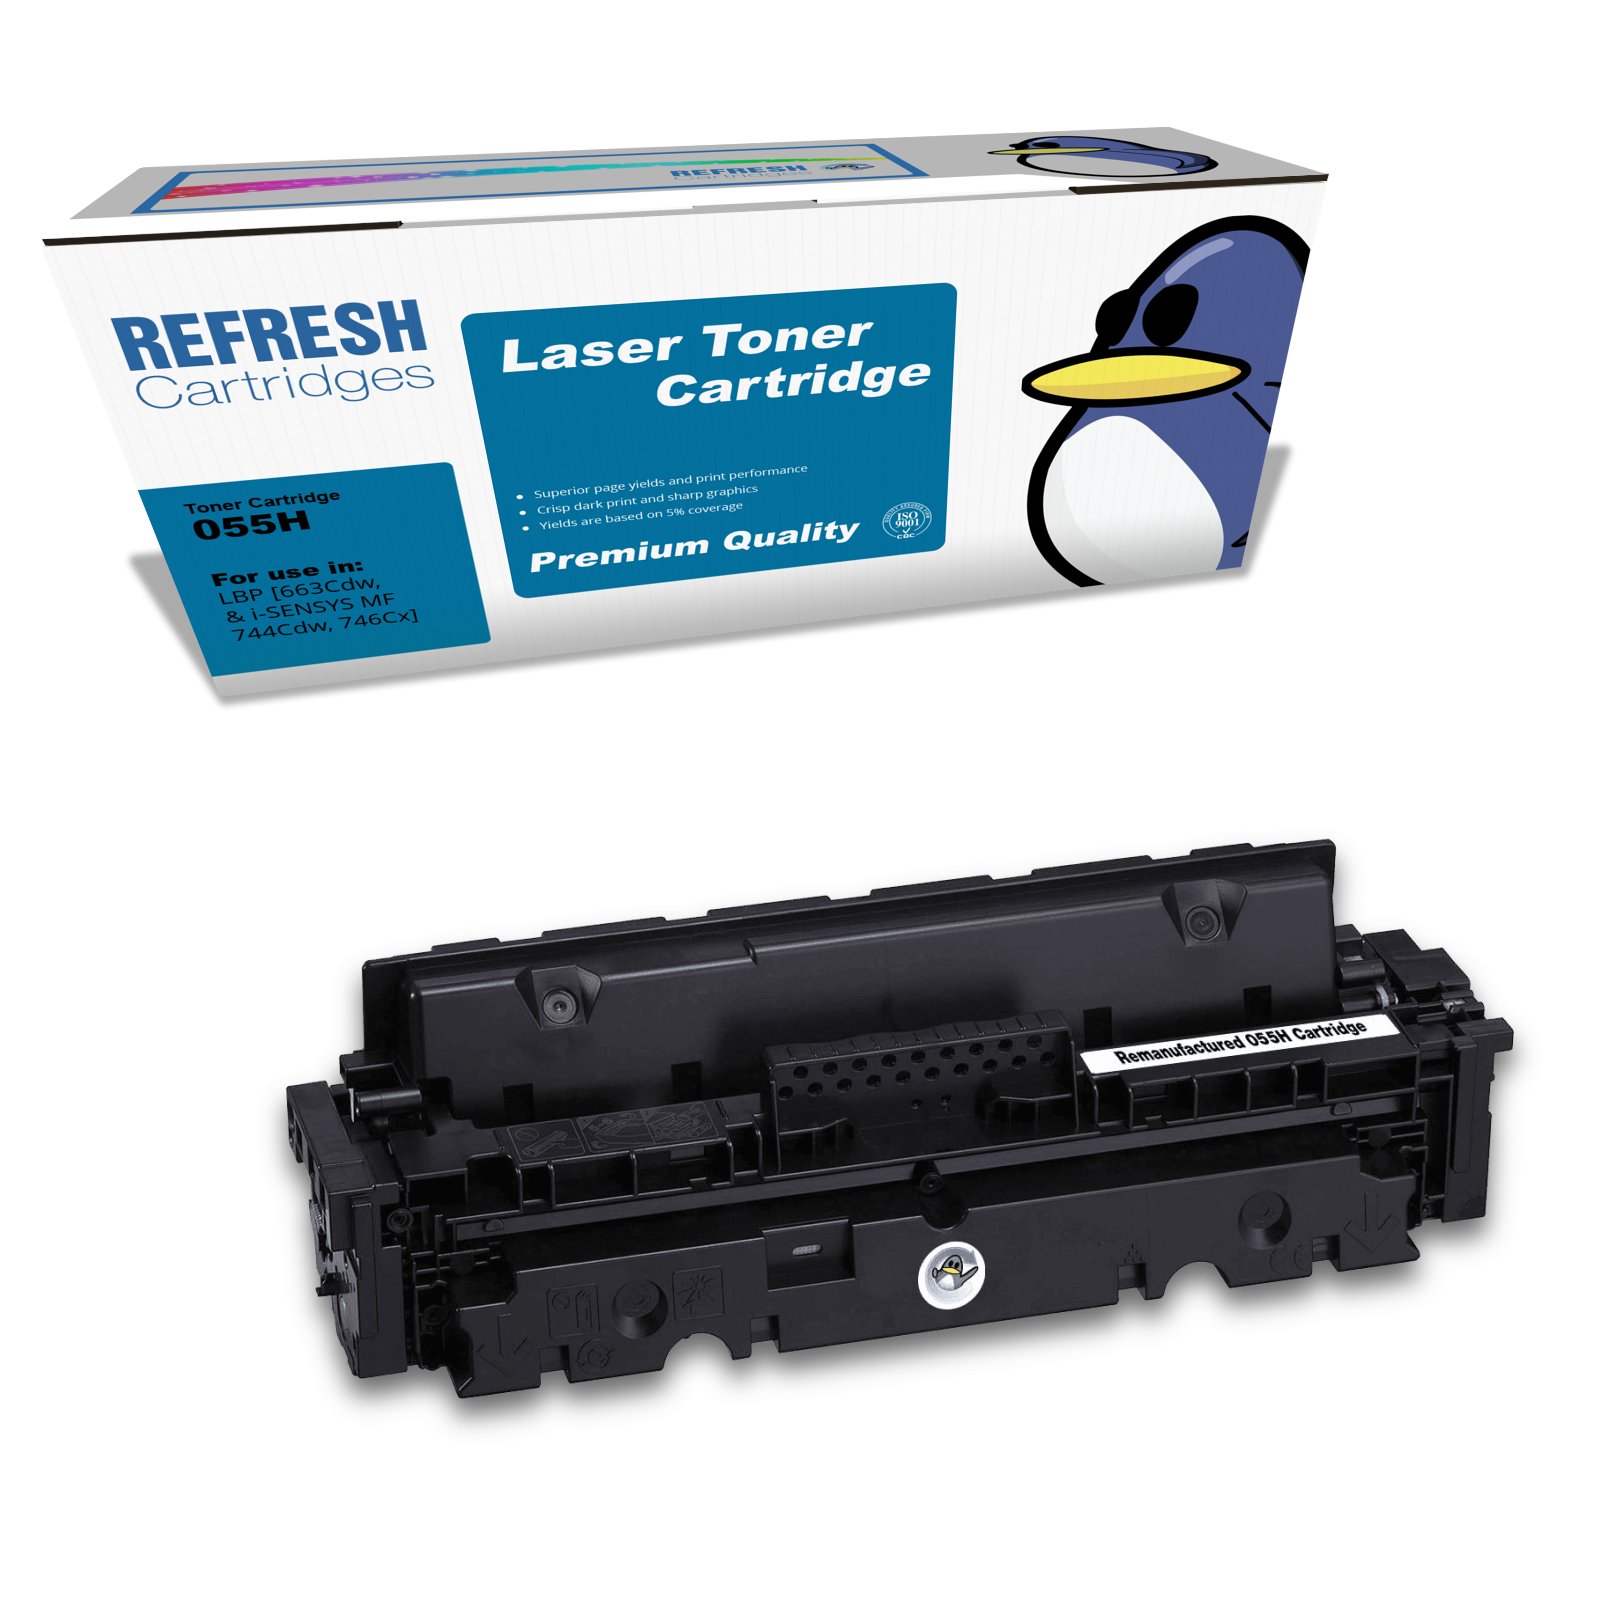 Remanufactured 055H (3020C002) High Capacity Black Toner Cartridge Replacement for Canon Printers